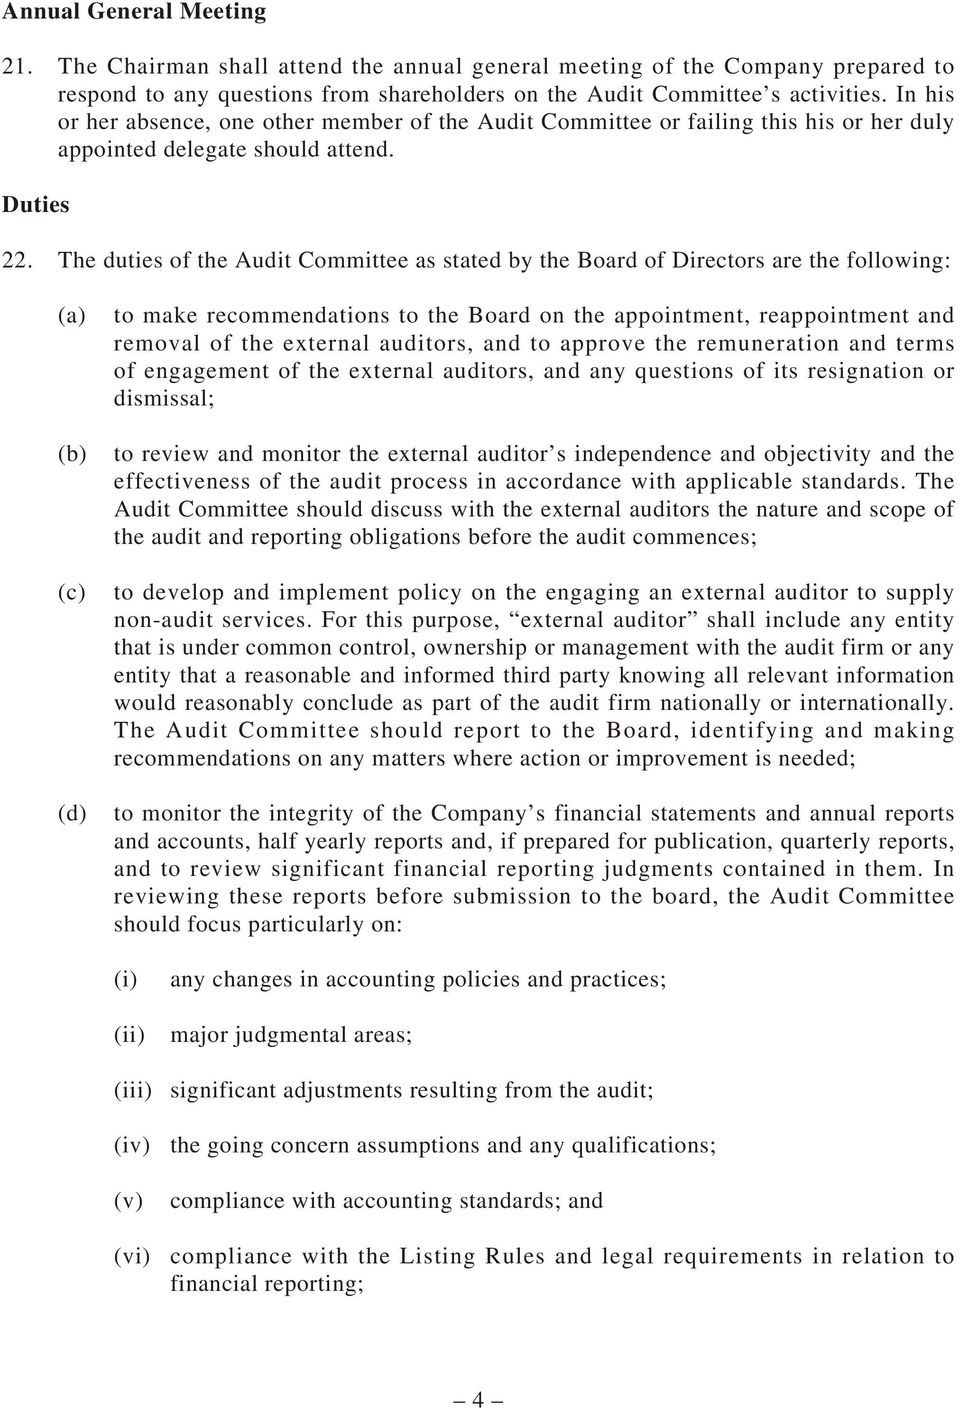 The duties of the Audit Committee as stated by the Board of Directors are the following: (a) (b) (c) (d) to make recommendations to the Board on the appointment, reappointment and removal of the